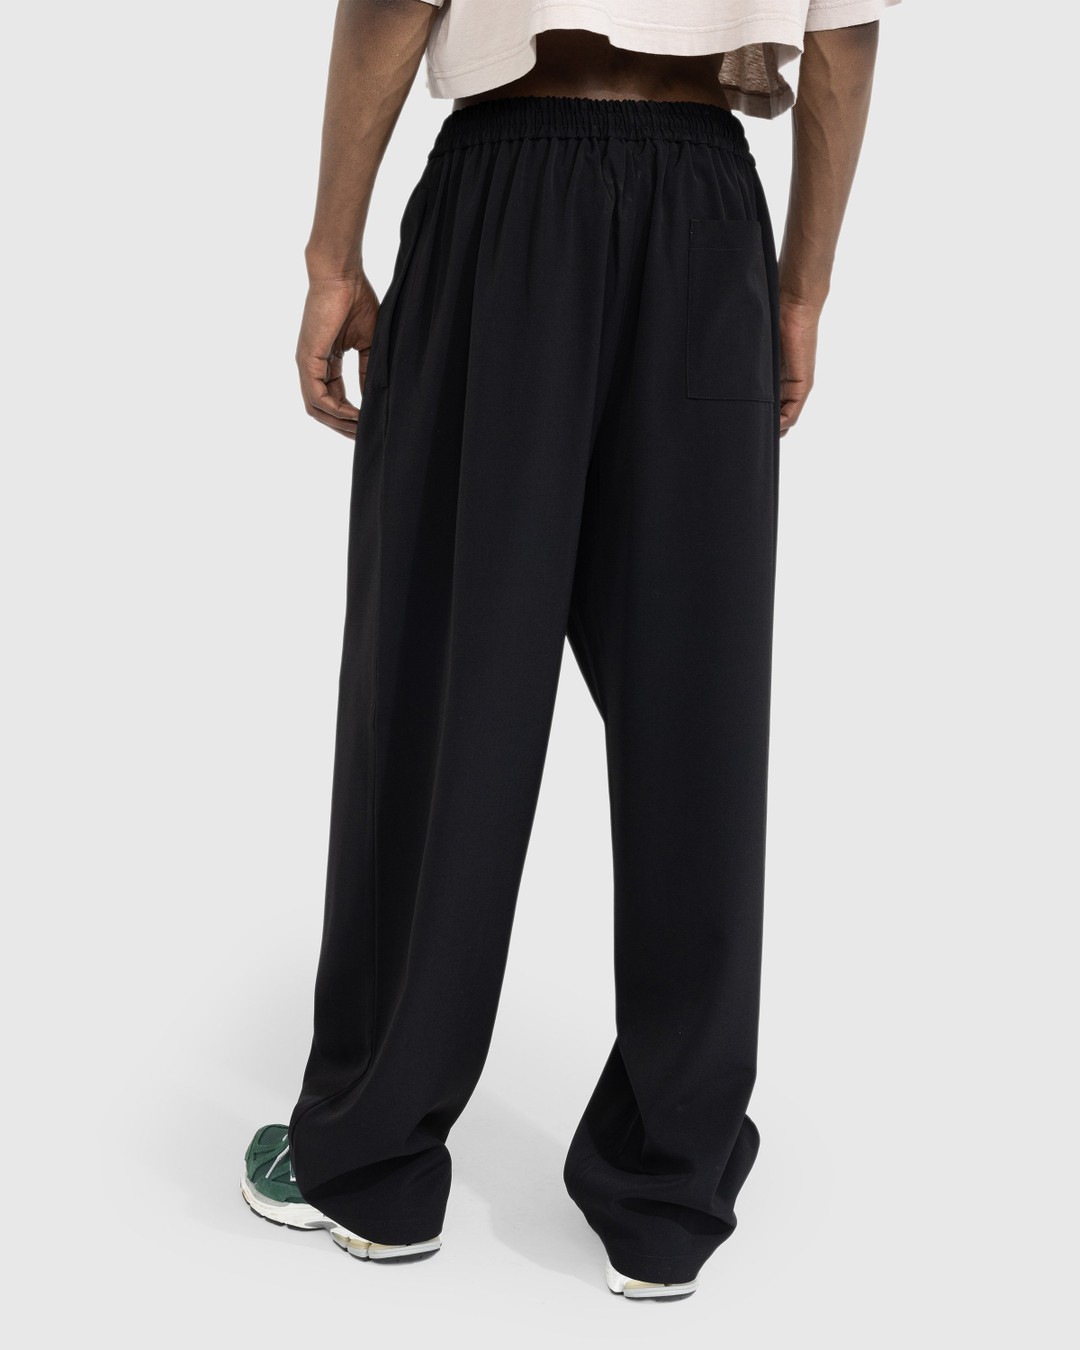 Acne Studios – Relaxed Fit Trousers Black - Pants - Black - Image 3